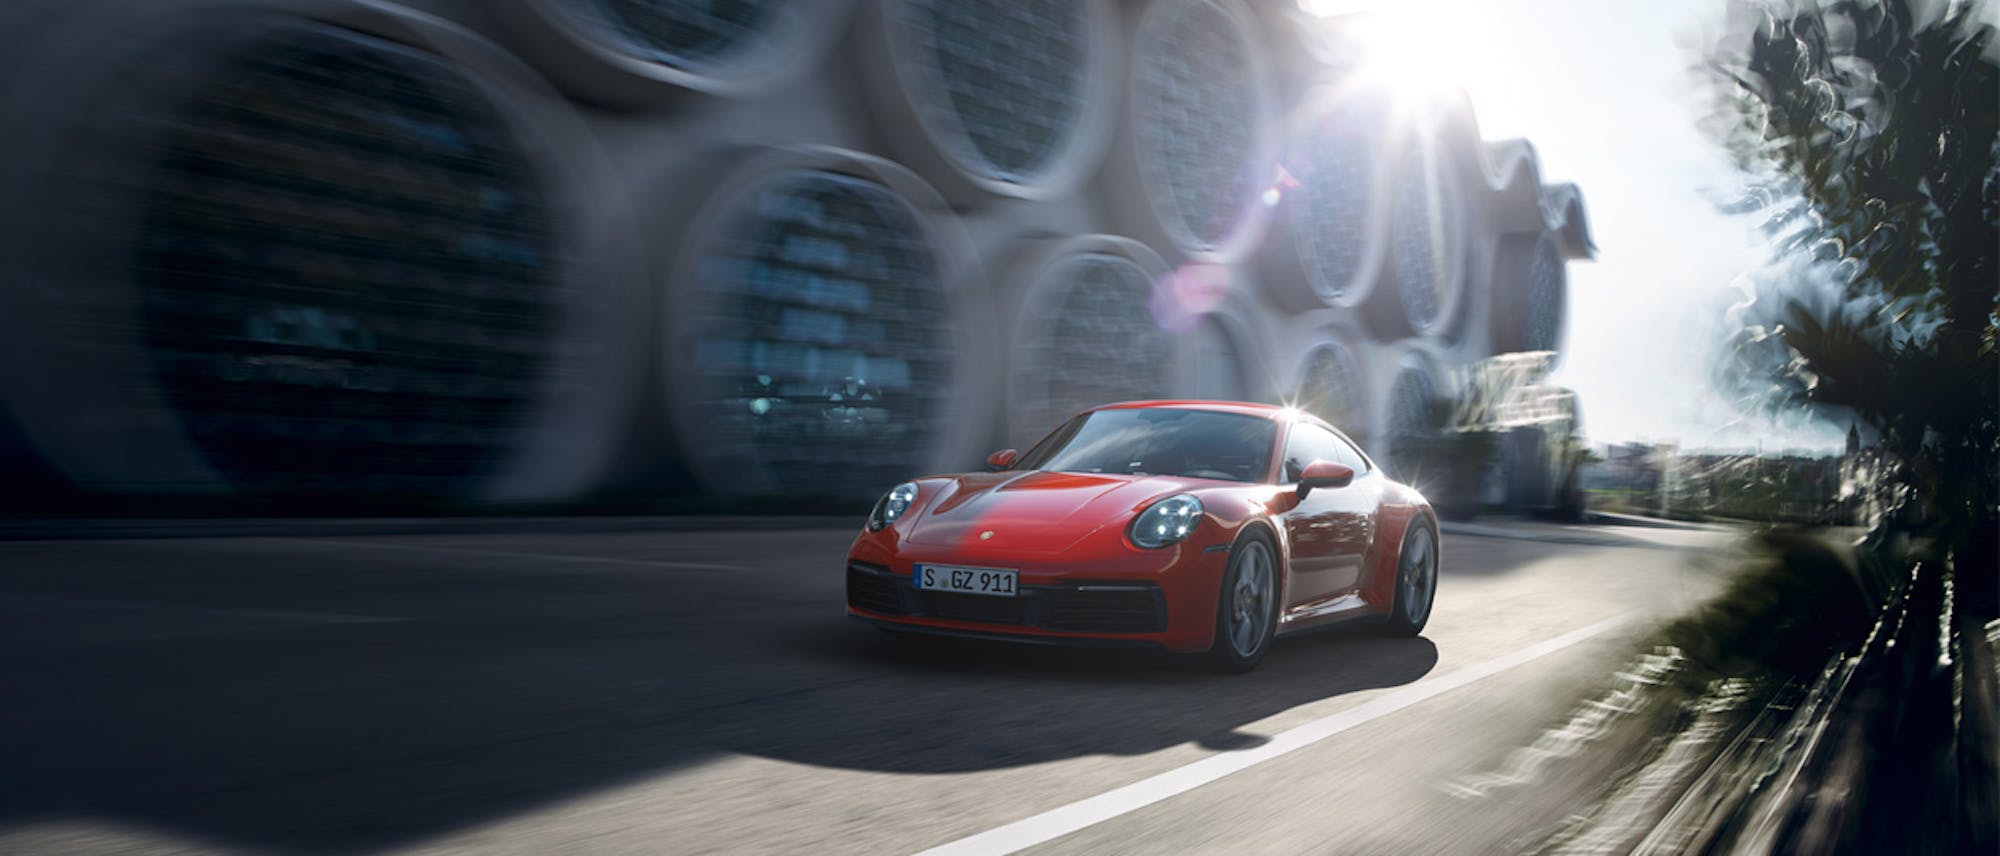 Red Porsche 911 driving past blurred building with large, circular windows